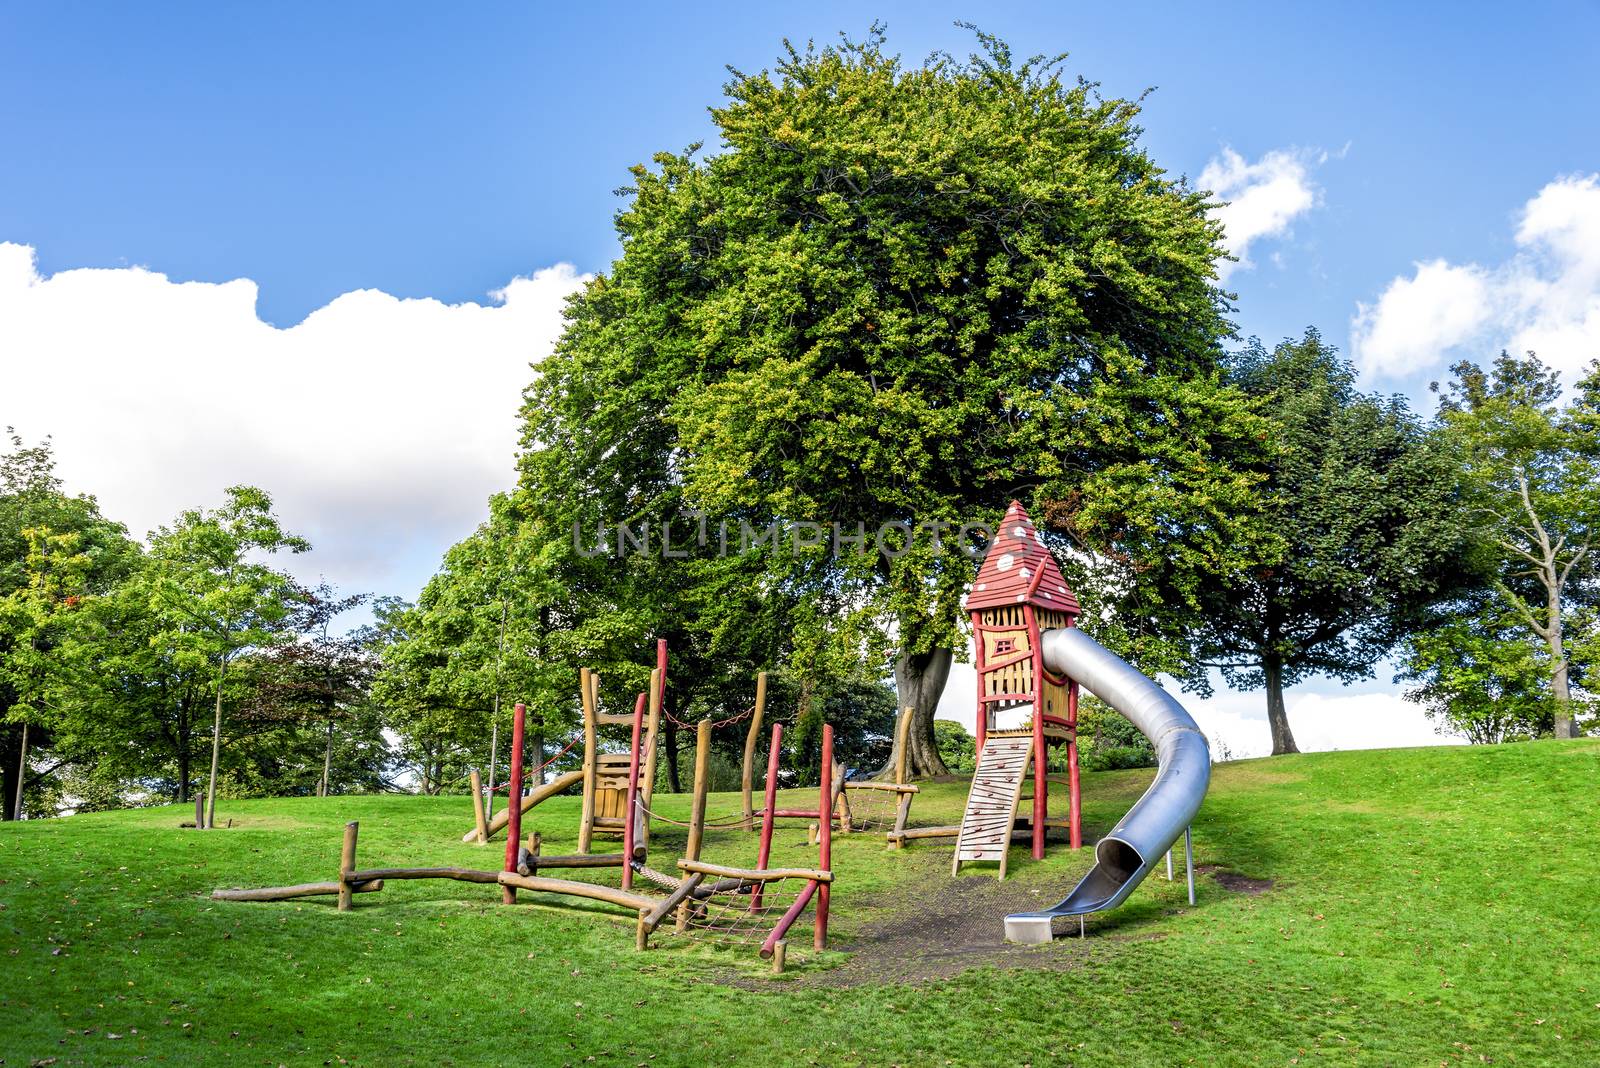 A small obstacle course and a tall magic house with a tube slide in Duthie park, Aberdeen, Scotland by anastasstyles